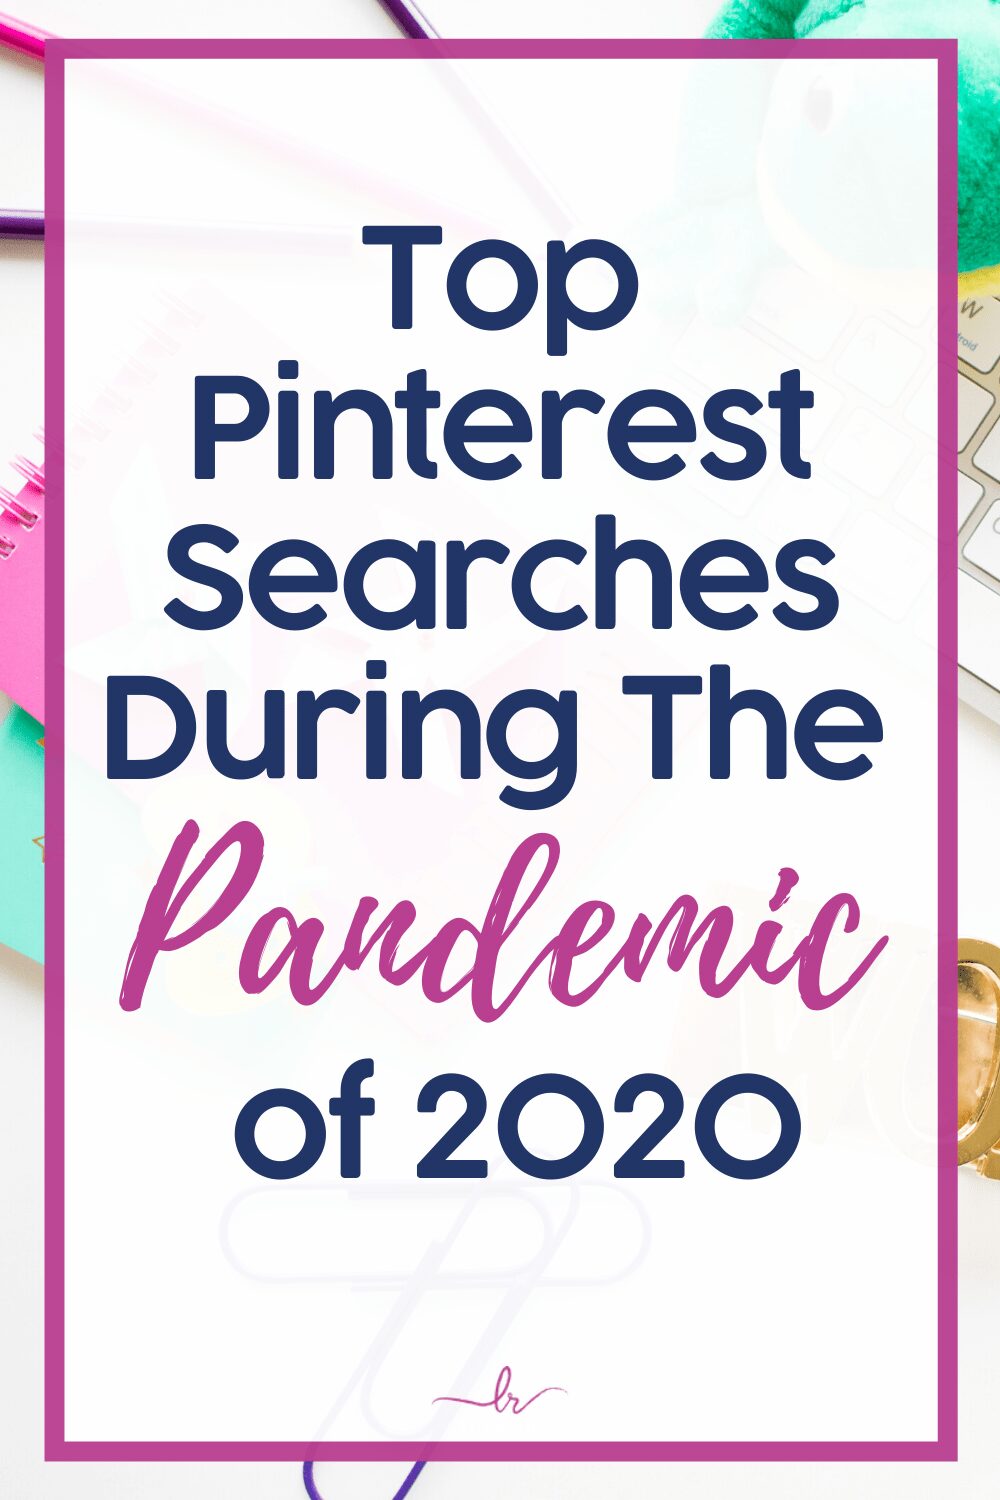 Top Pinterest Searches During The Pandemic of 2020 Laura Rike